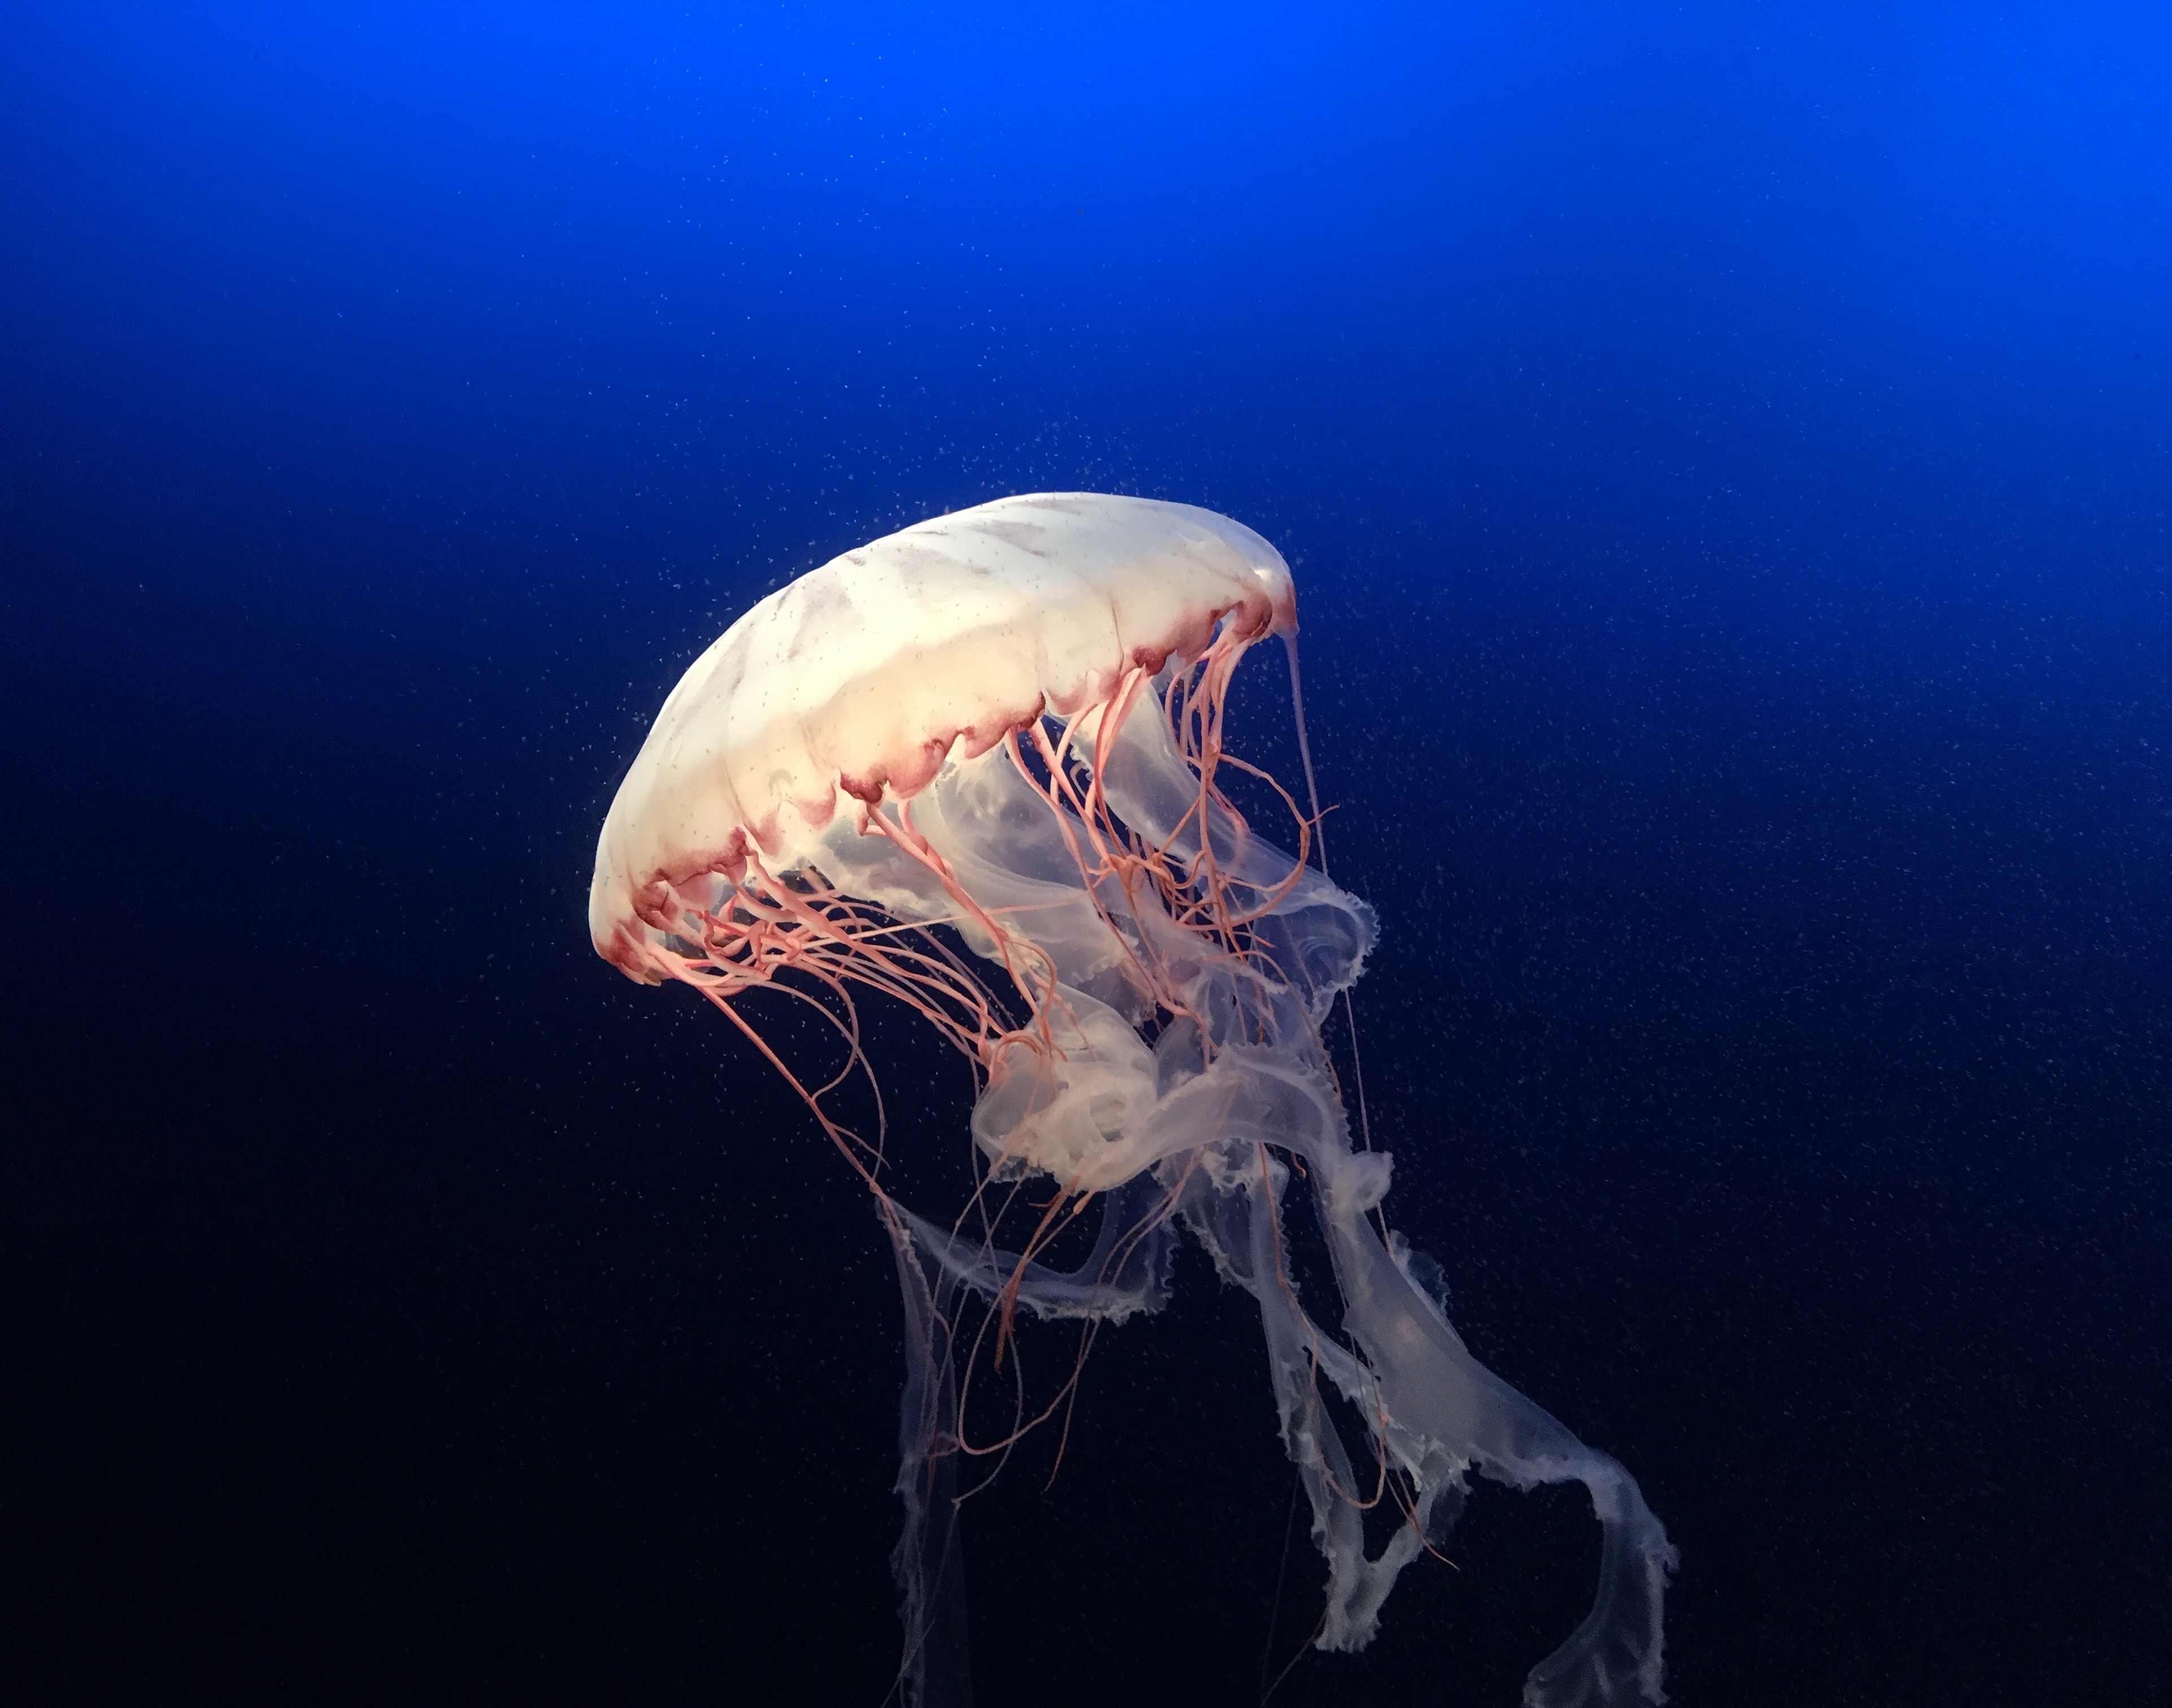 Wallpaper for mobile devices swimming, underwater world, ocean, jellyfish